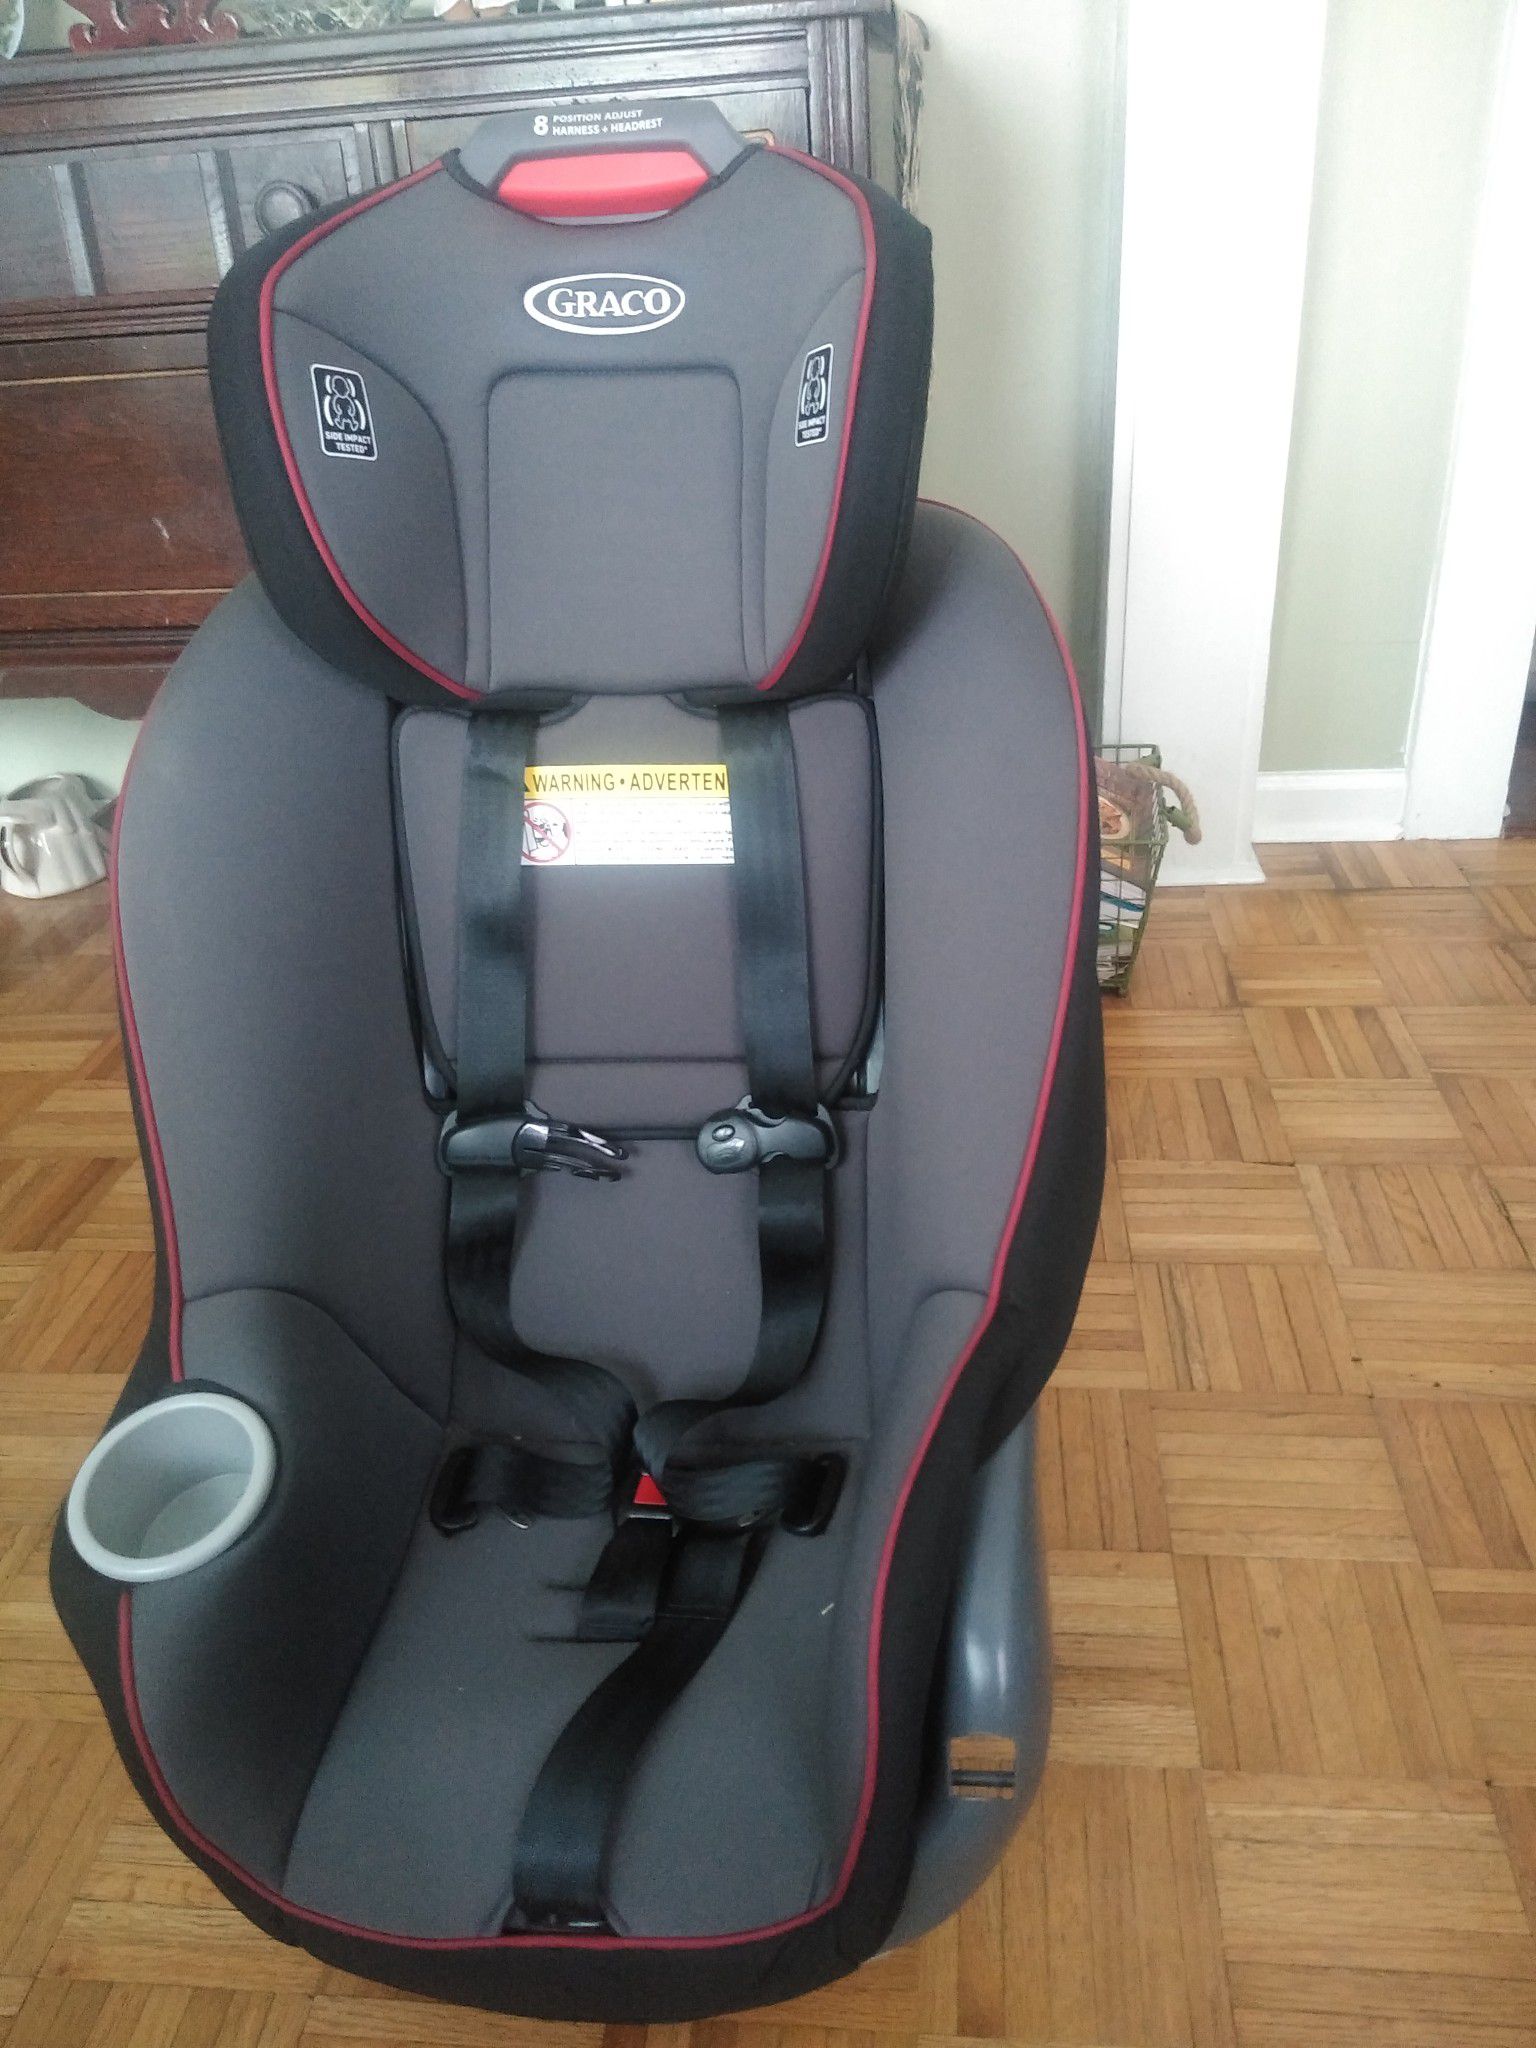 GRACO, Child car seat. Excellent brand 5 to 65 pounds. Perfect condition.